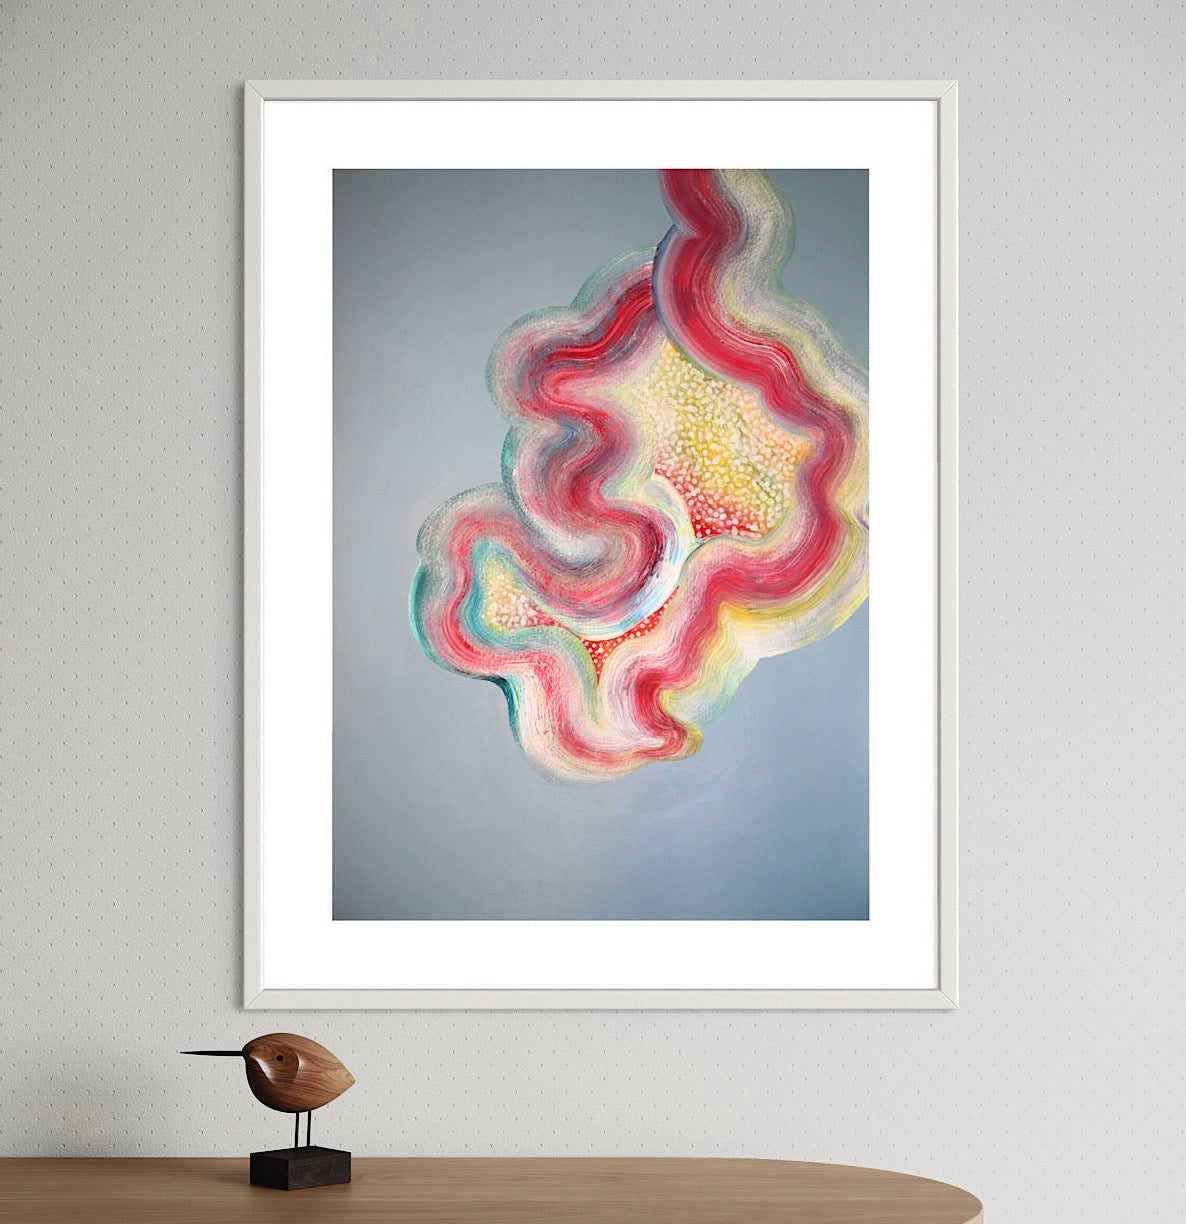 Vibrant abstract art for the home